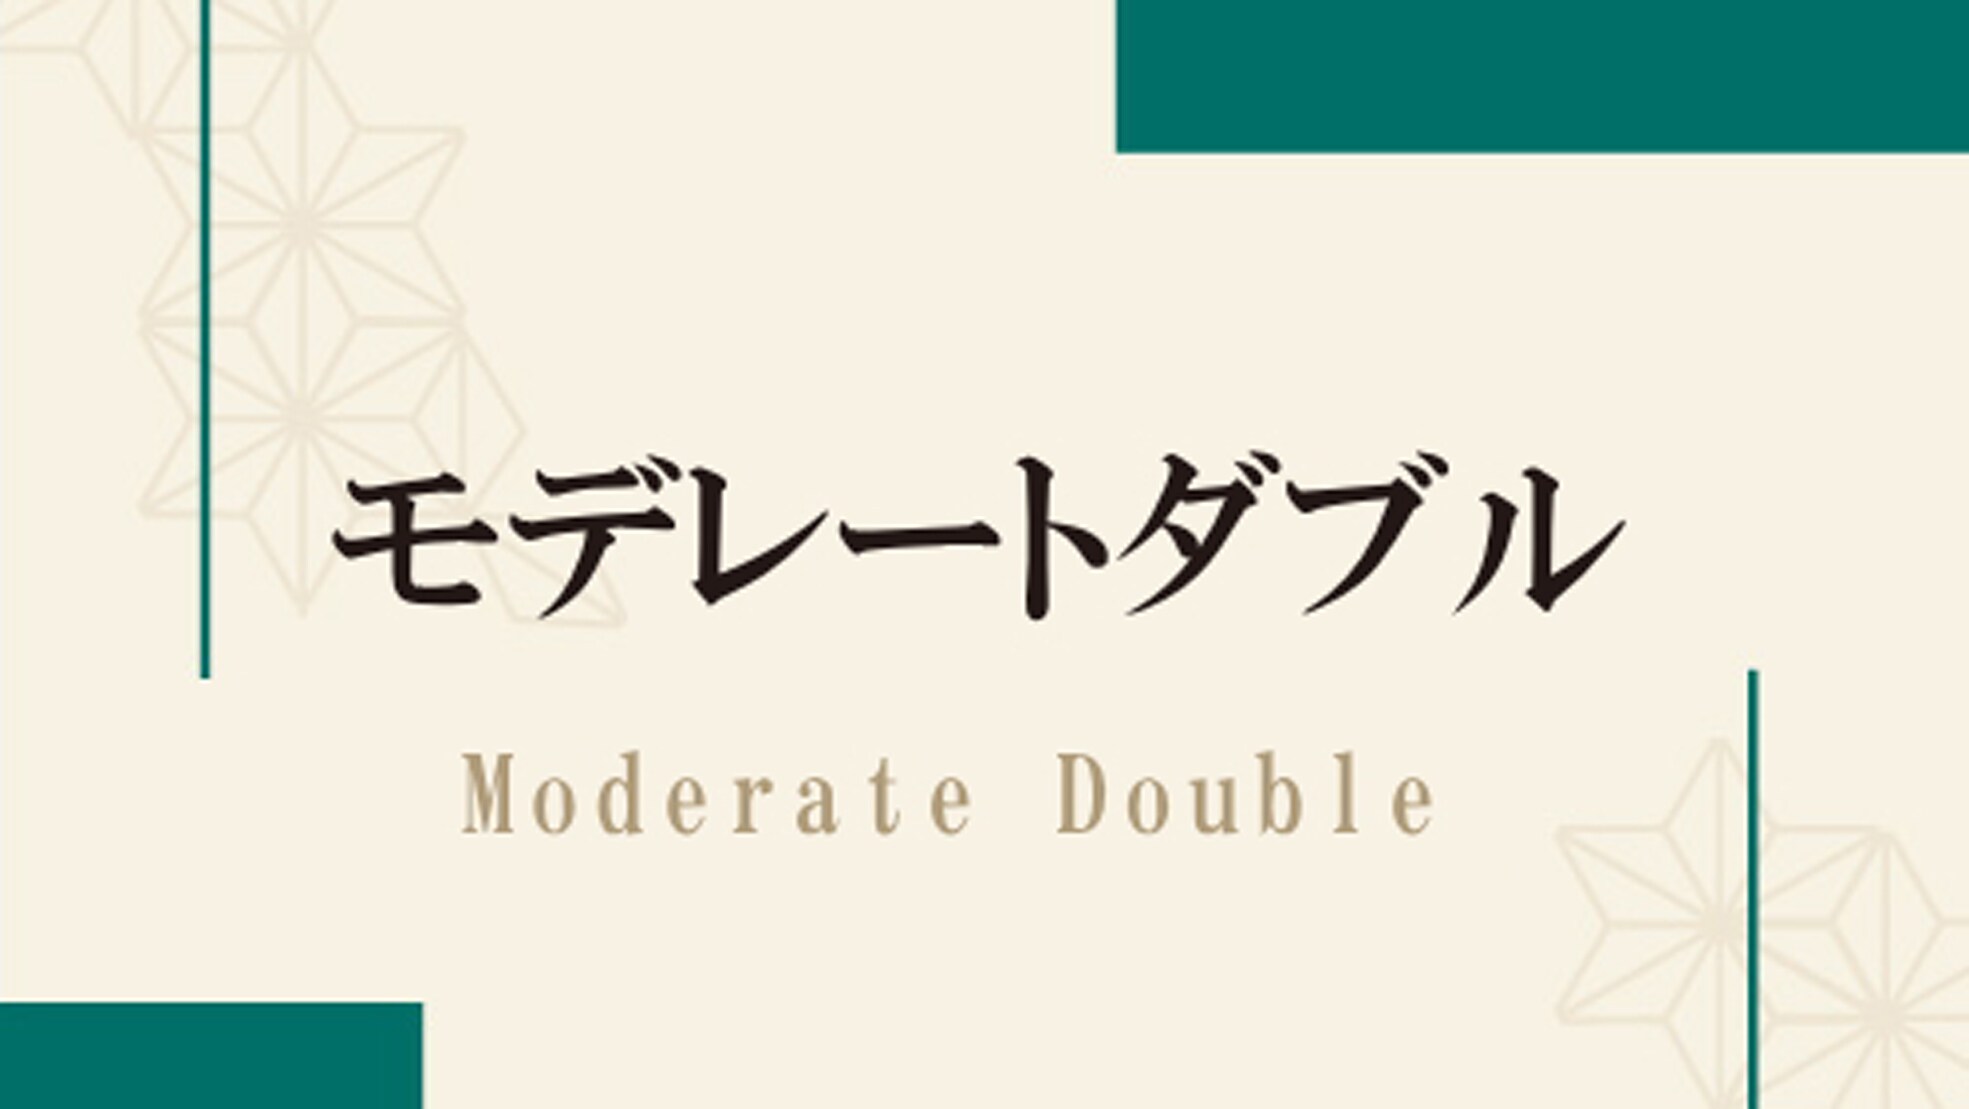 ◇ Moderate Double <Basic charge: 38,900 yen ~ Consumption tax and accommodation tax included>